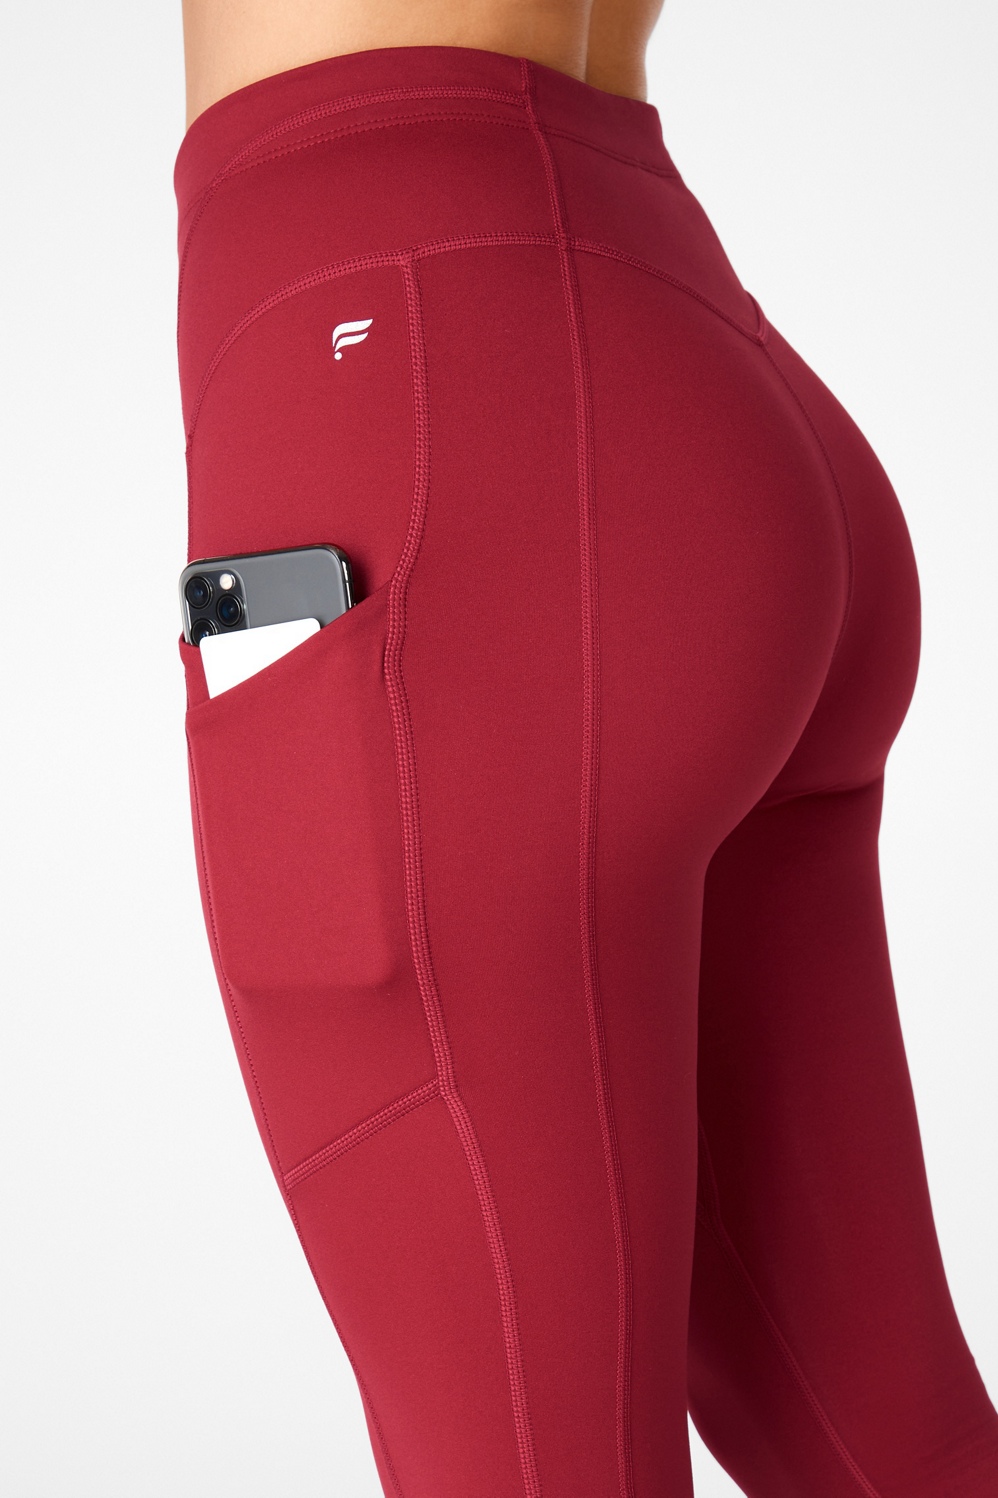 High-Waisted Motion365® Pocket 7/8 - Fabletics